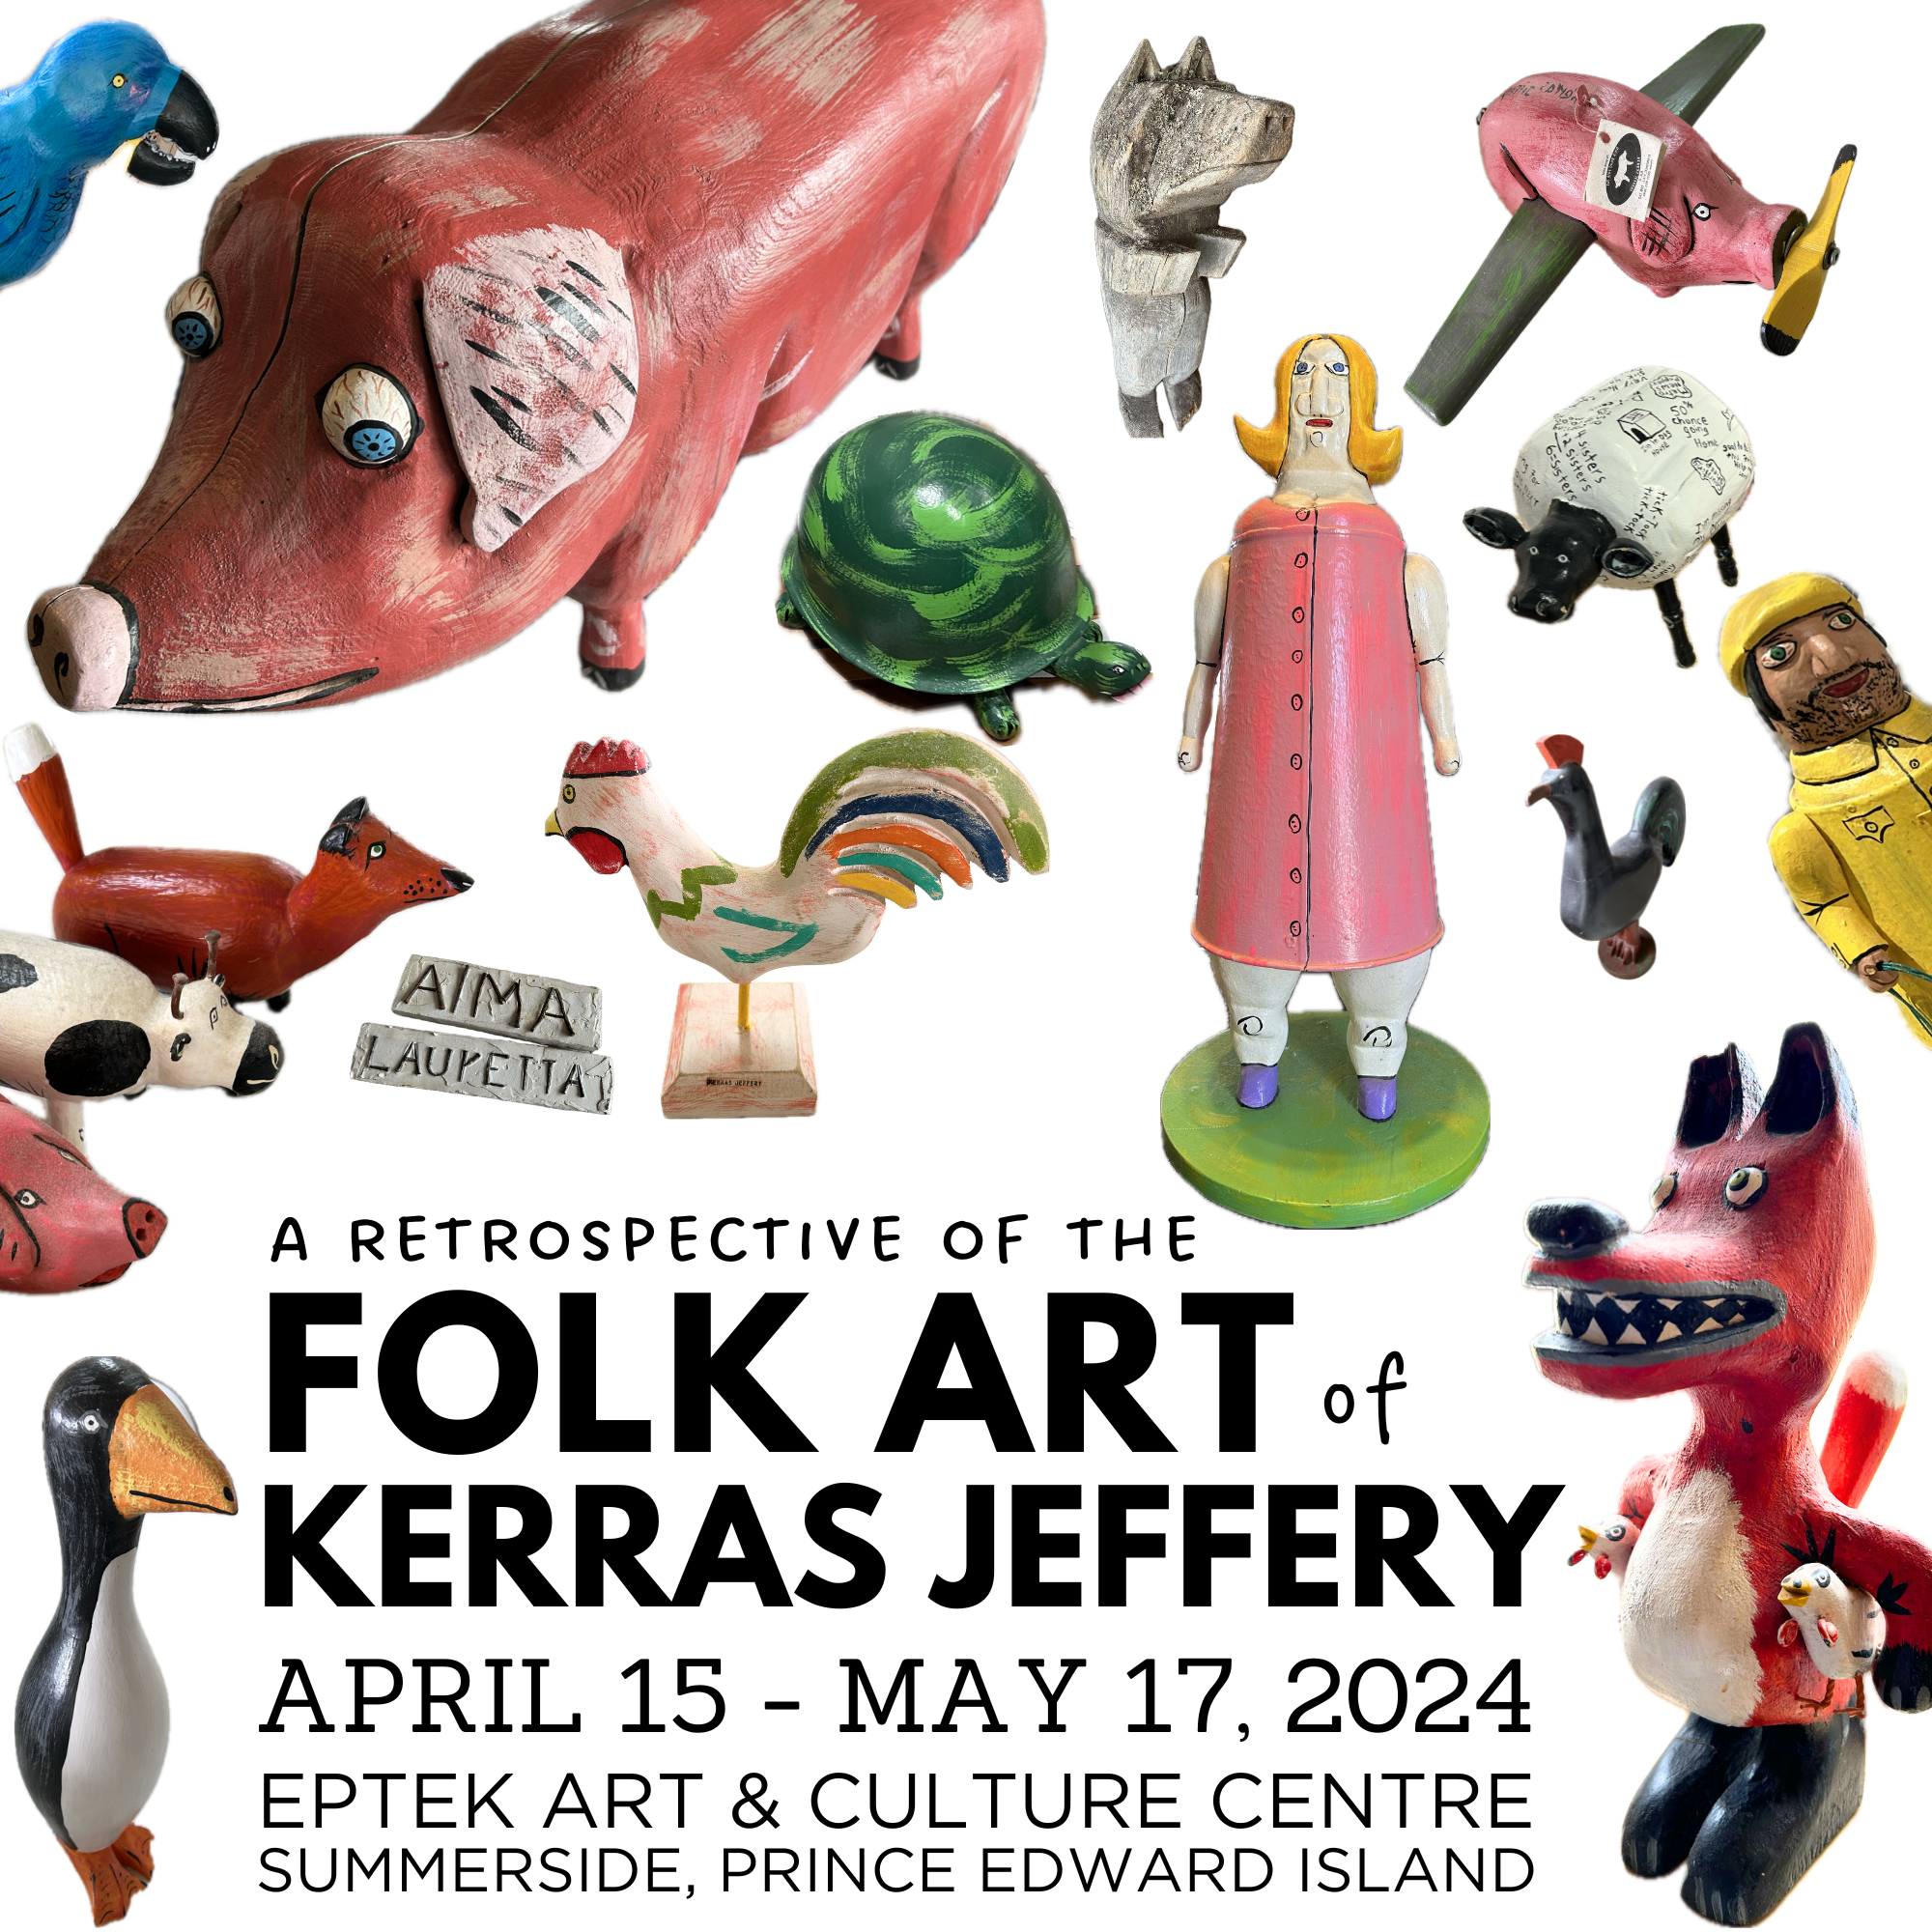 A collage of wooden toys made by Kerras Jeffery, including a pig, turtle, rooster, rhino, sheep, fox, penguin, and a blonde doll in pink dress. The text on the image says "A retrospective of the Folk Art of Kerras Jeffery, April 15- May 17, 2024, Eptek Art & Culture Centre, Summerside, PEI.